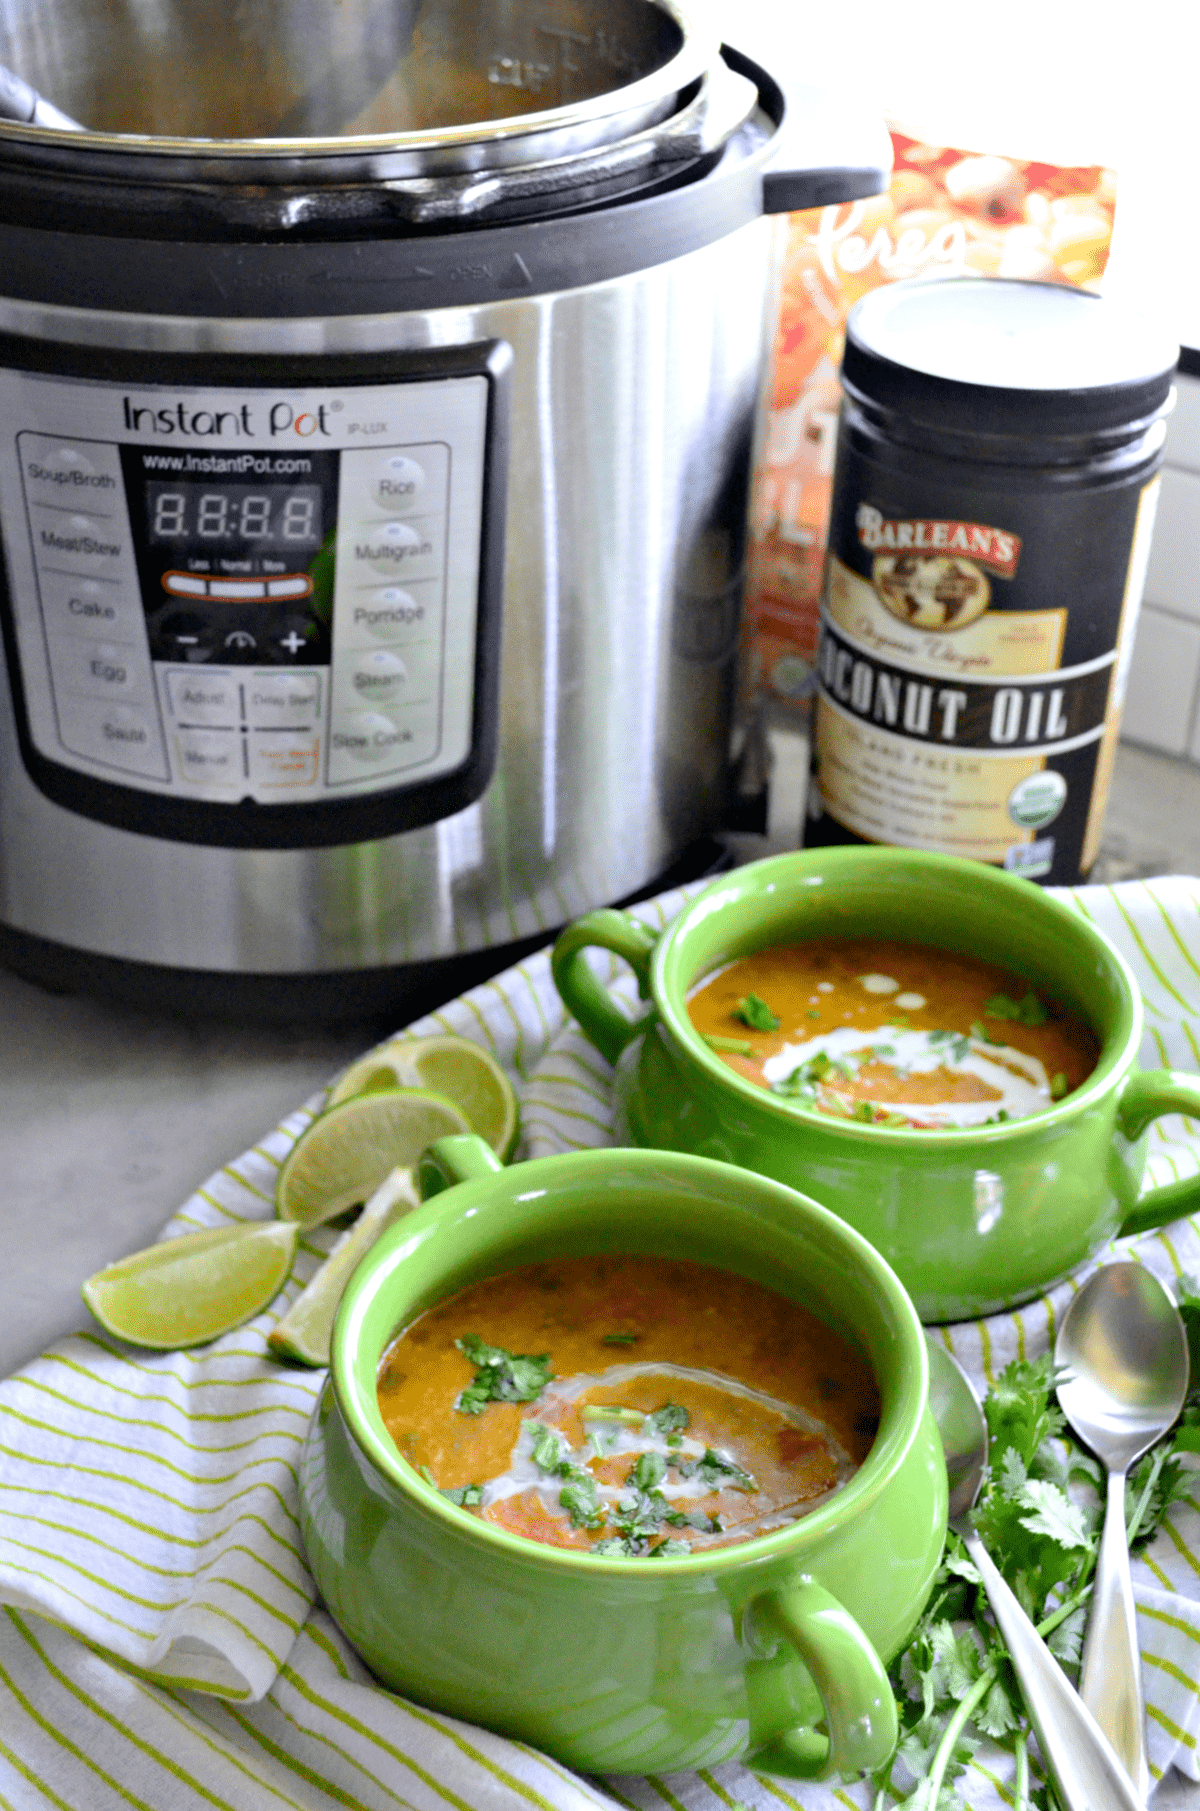 2 bowls of soup in front of instant pot and Barlean's Coconut Oil.